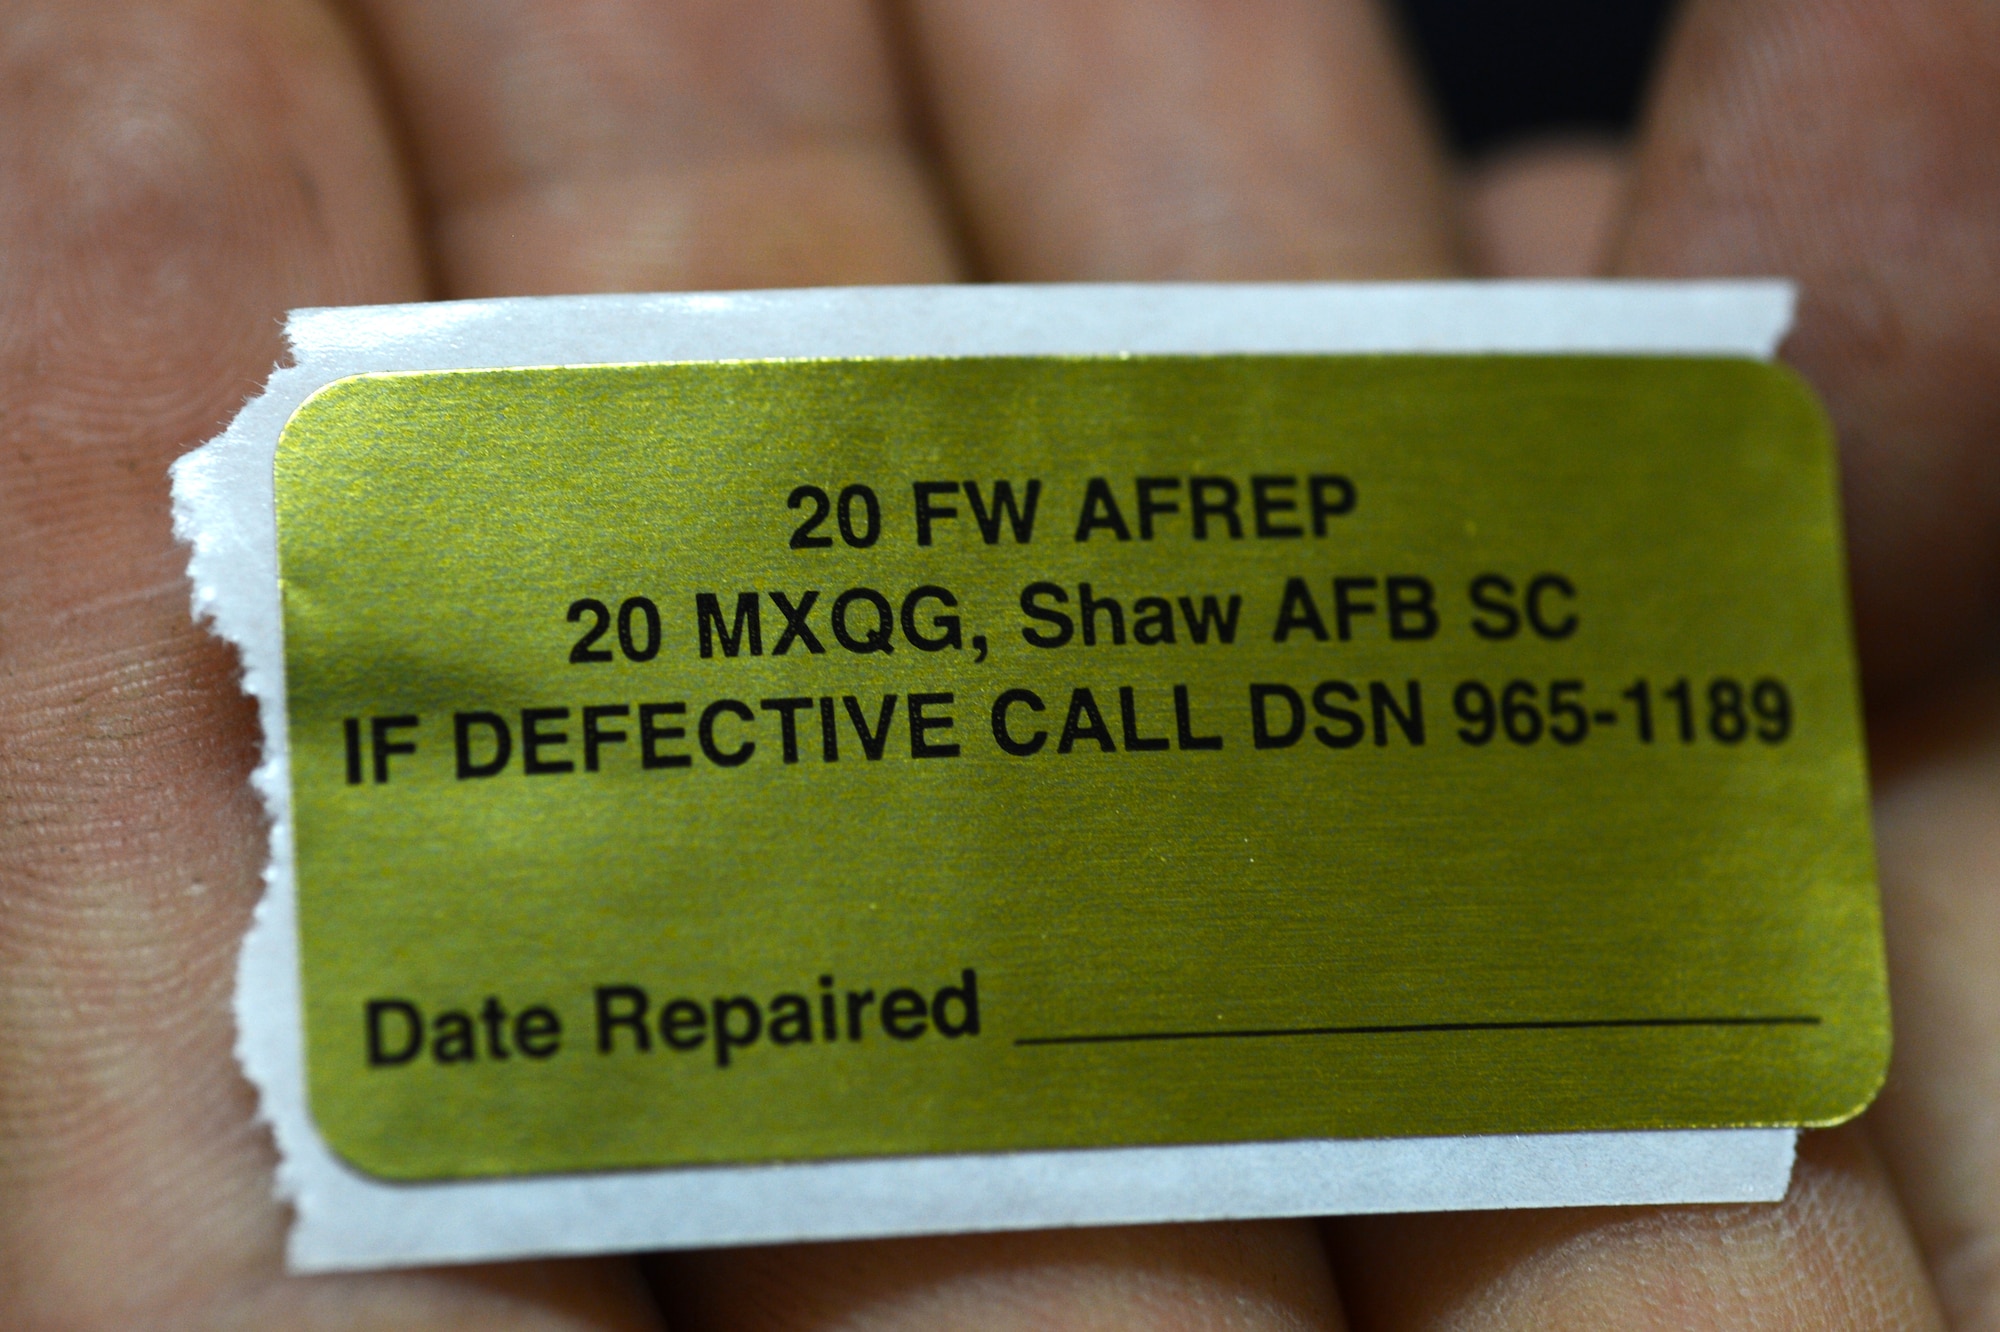 The 20th Maintenance Group’s Air Force Repair Enhancement Program technician holds an AFREP sticker for repaired equipment at Shaw Air Force Base, S.C., June 3, 2015. The Airmen use their maintenance skills to strip wires, solder electronics, and replace broken components to help achieve the mission. (U.S. Air Force photo by Senior Airman Jonathan Bass/Released)